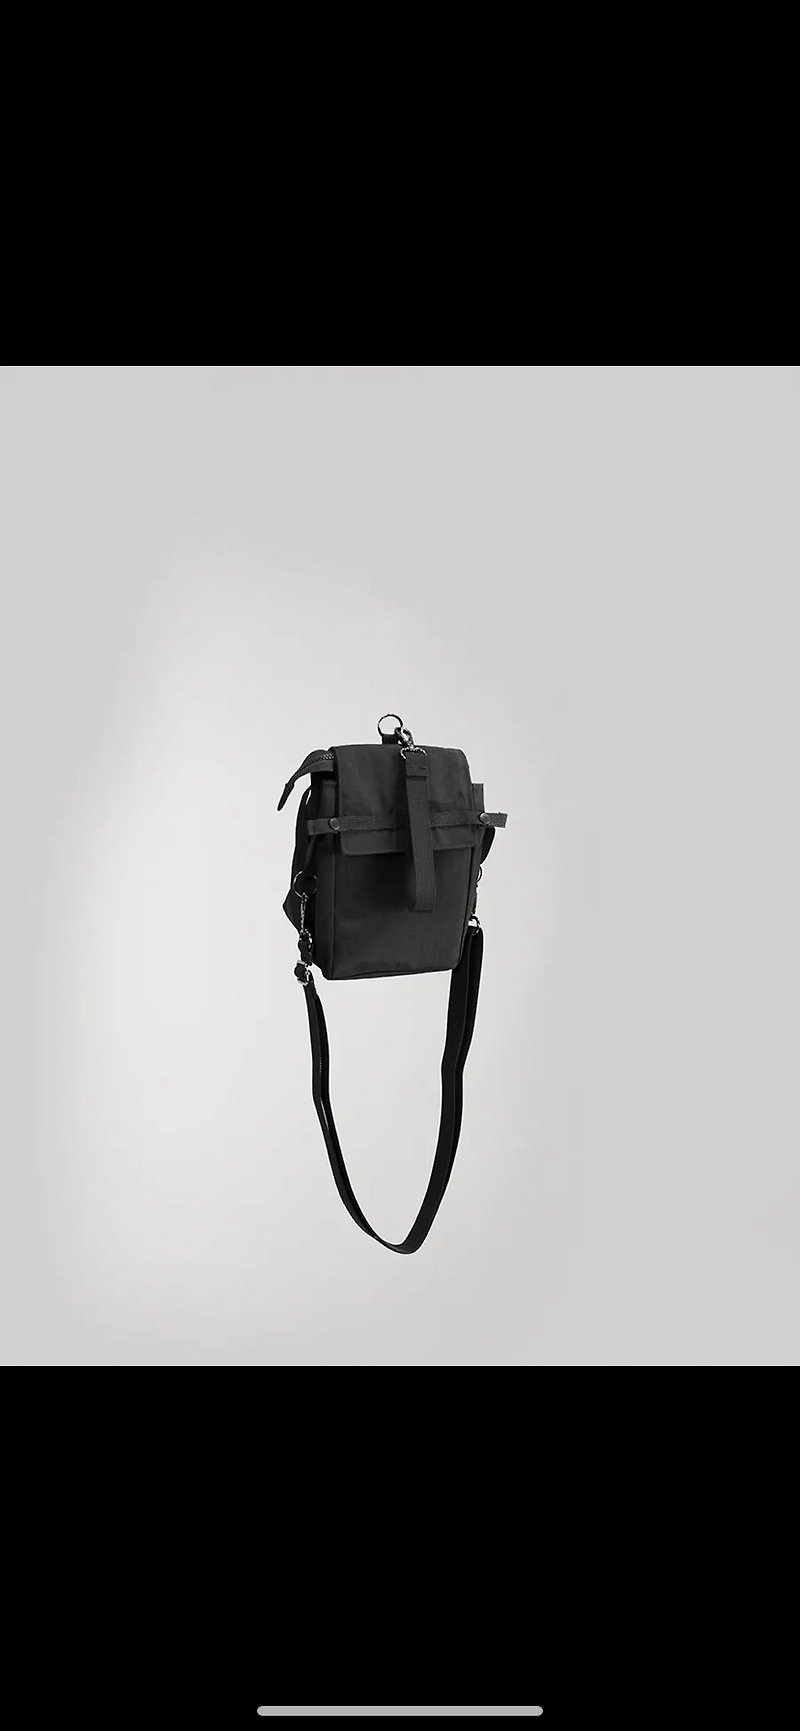 Limpact Ame x MUKK jointly designed simple zippered small bag - Messenger Bags & Sling Bags - Waterproof Material Black